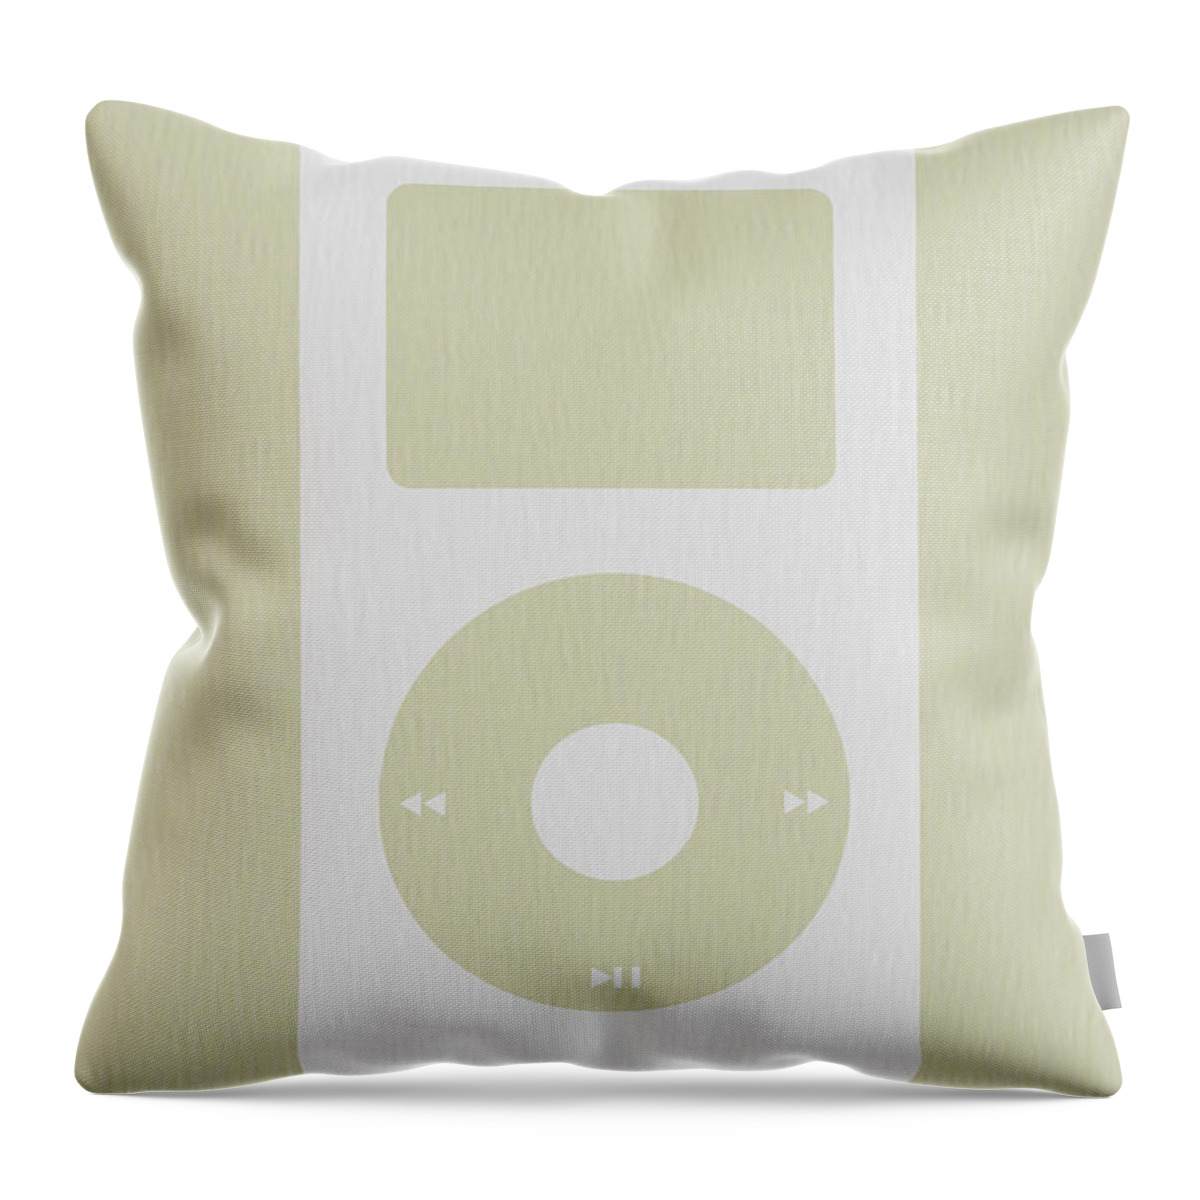 Ipod Throw Pillow featuring the photograph iPod by Naxart Studio